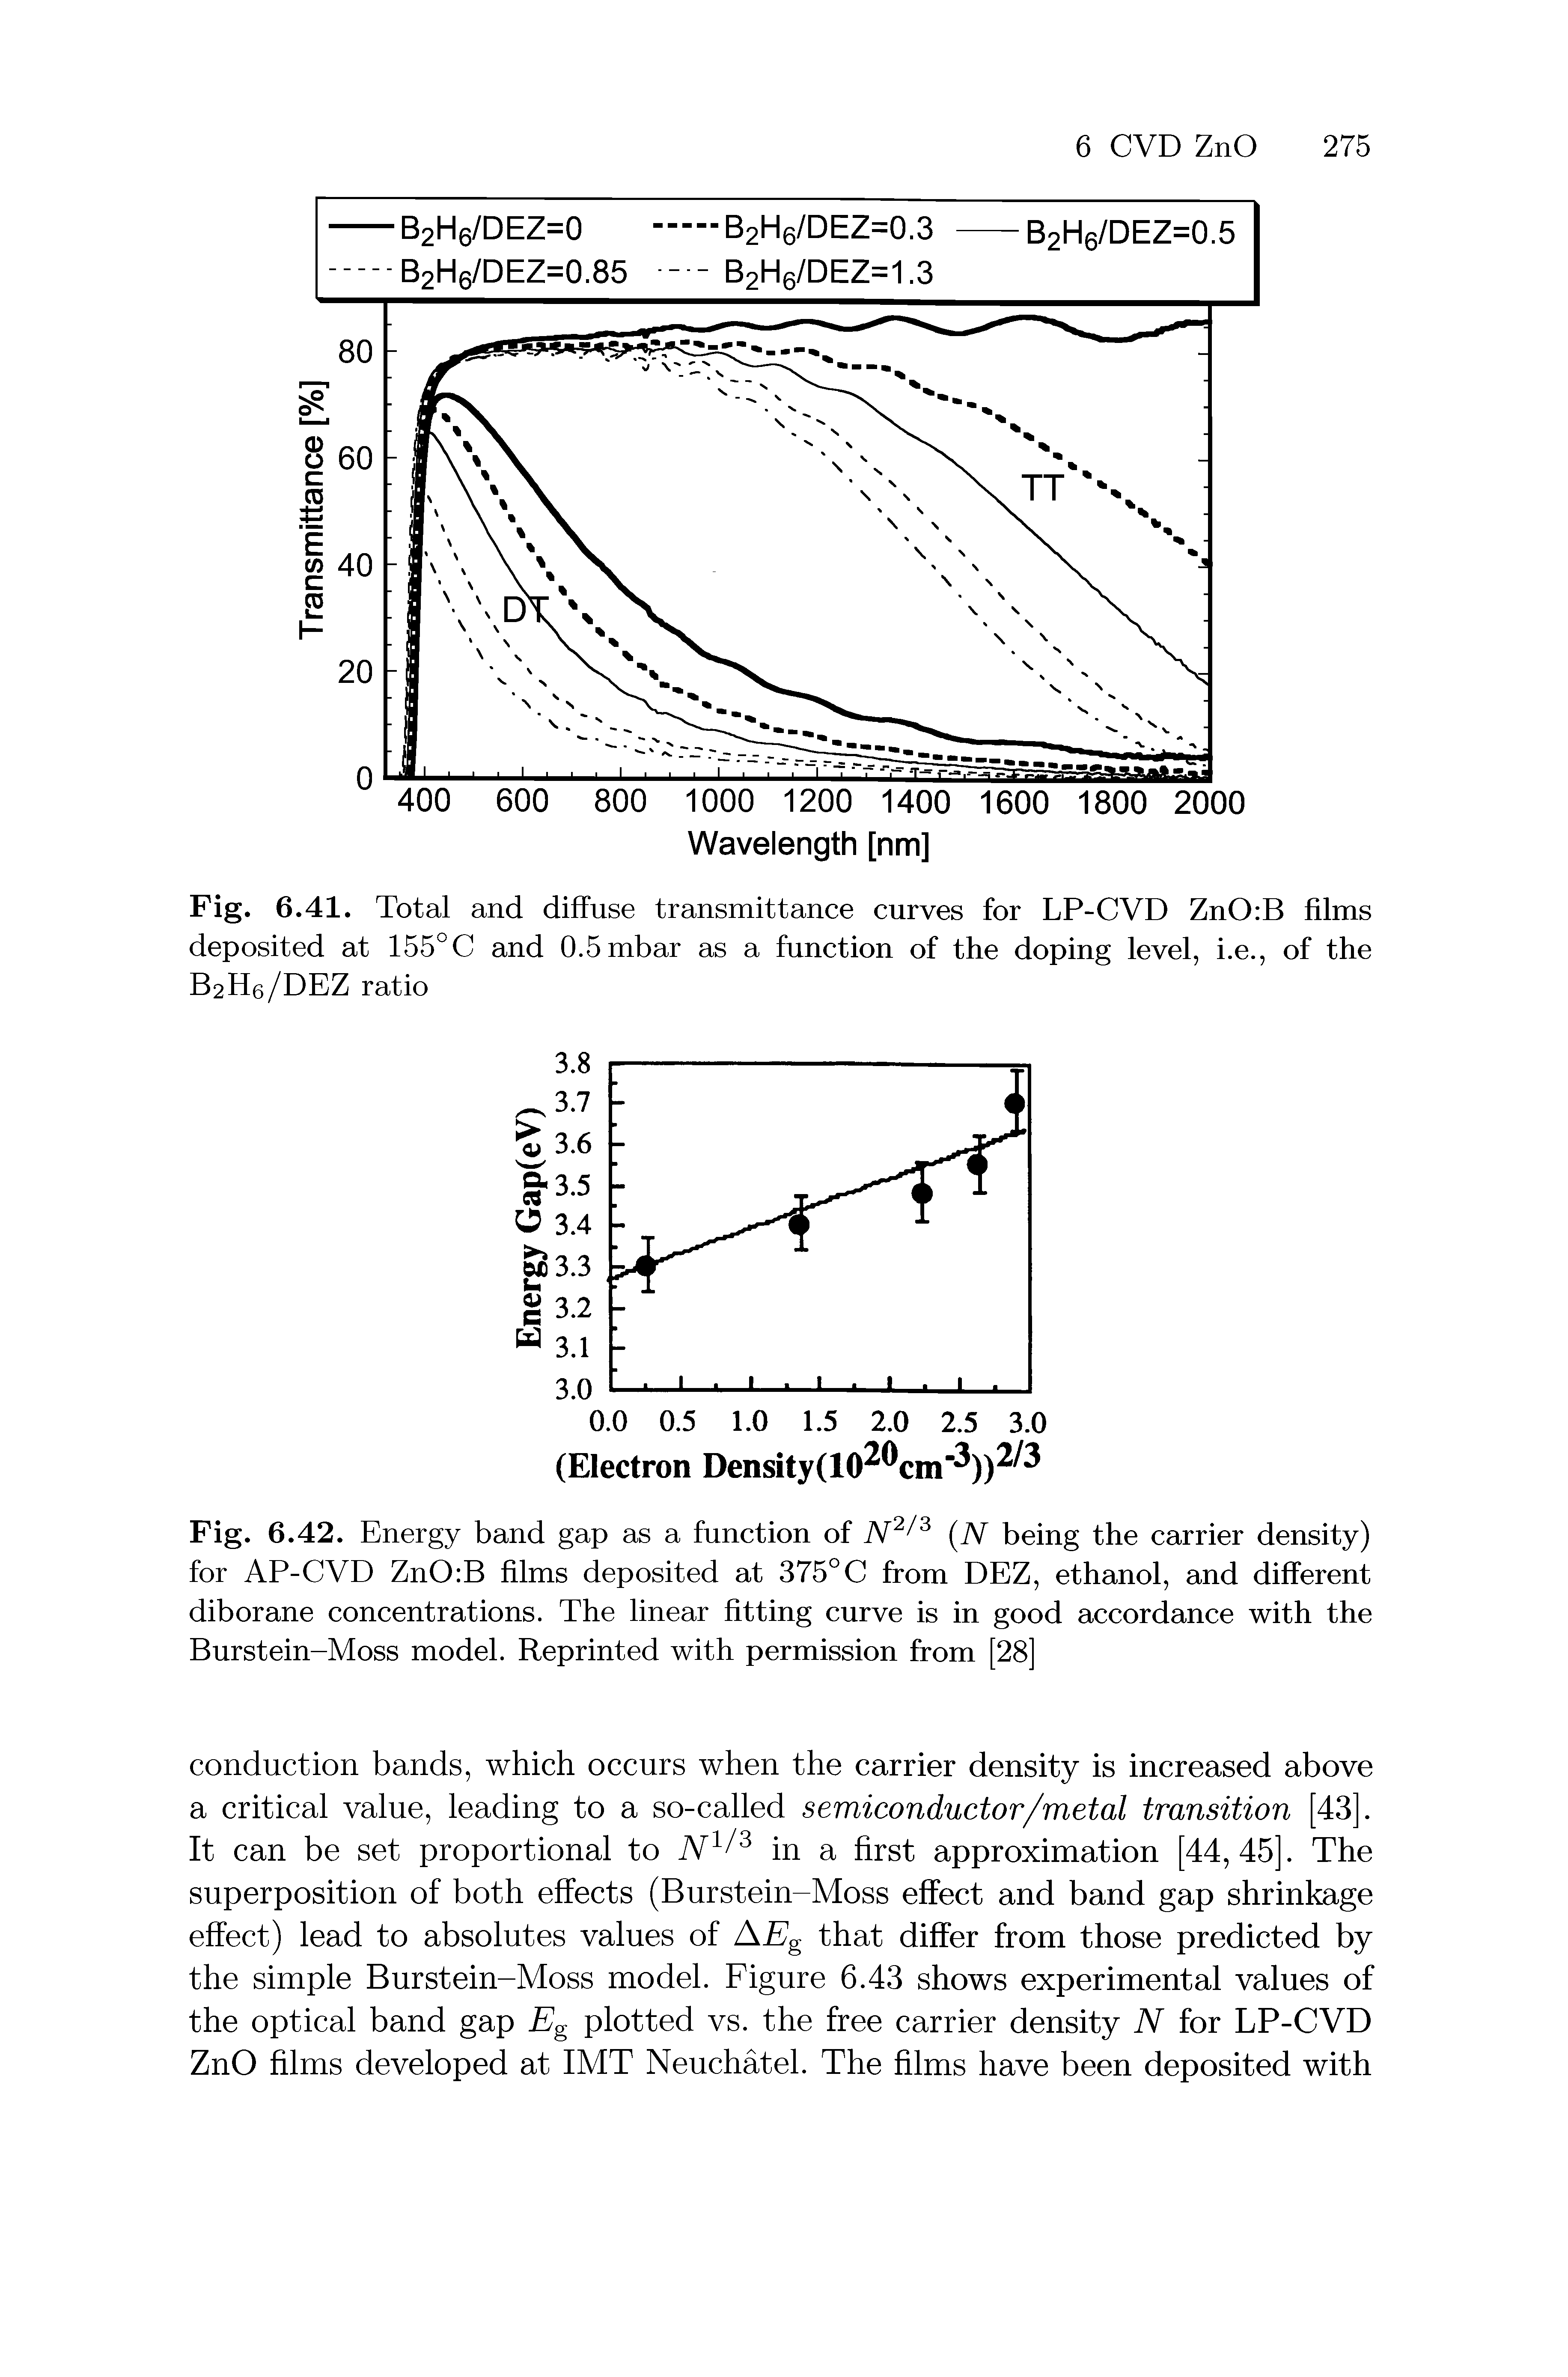 Fig. 6.42. Energy band gap as a function of N2/3 (N being the carrier density) for AP-CVD ZnO B films deposited at 375° C from DEZ, ethanol, and different diborane concentrations. The linear fitting curve is in good accordance with the Burstein-Moss model. Reprinted with permission from [28]...